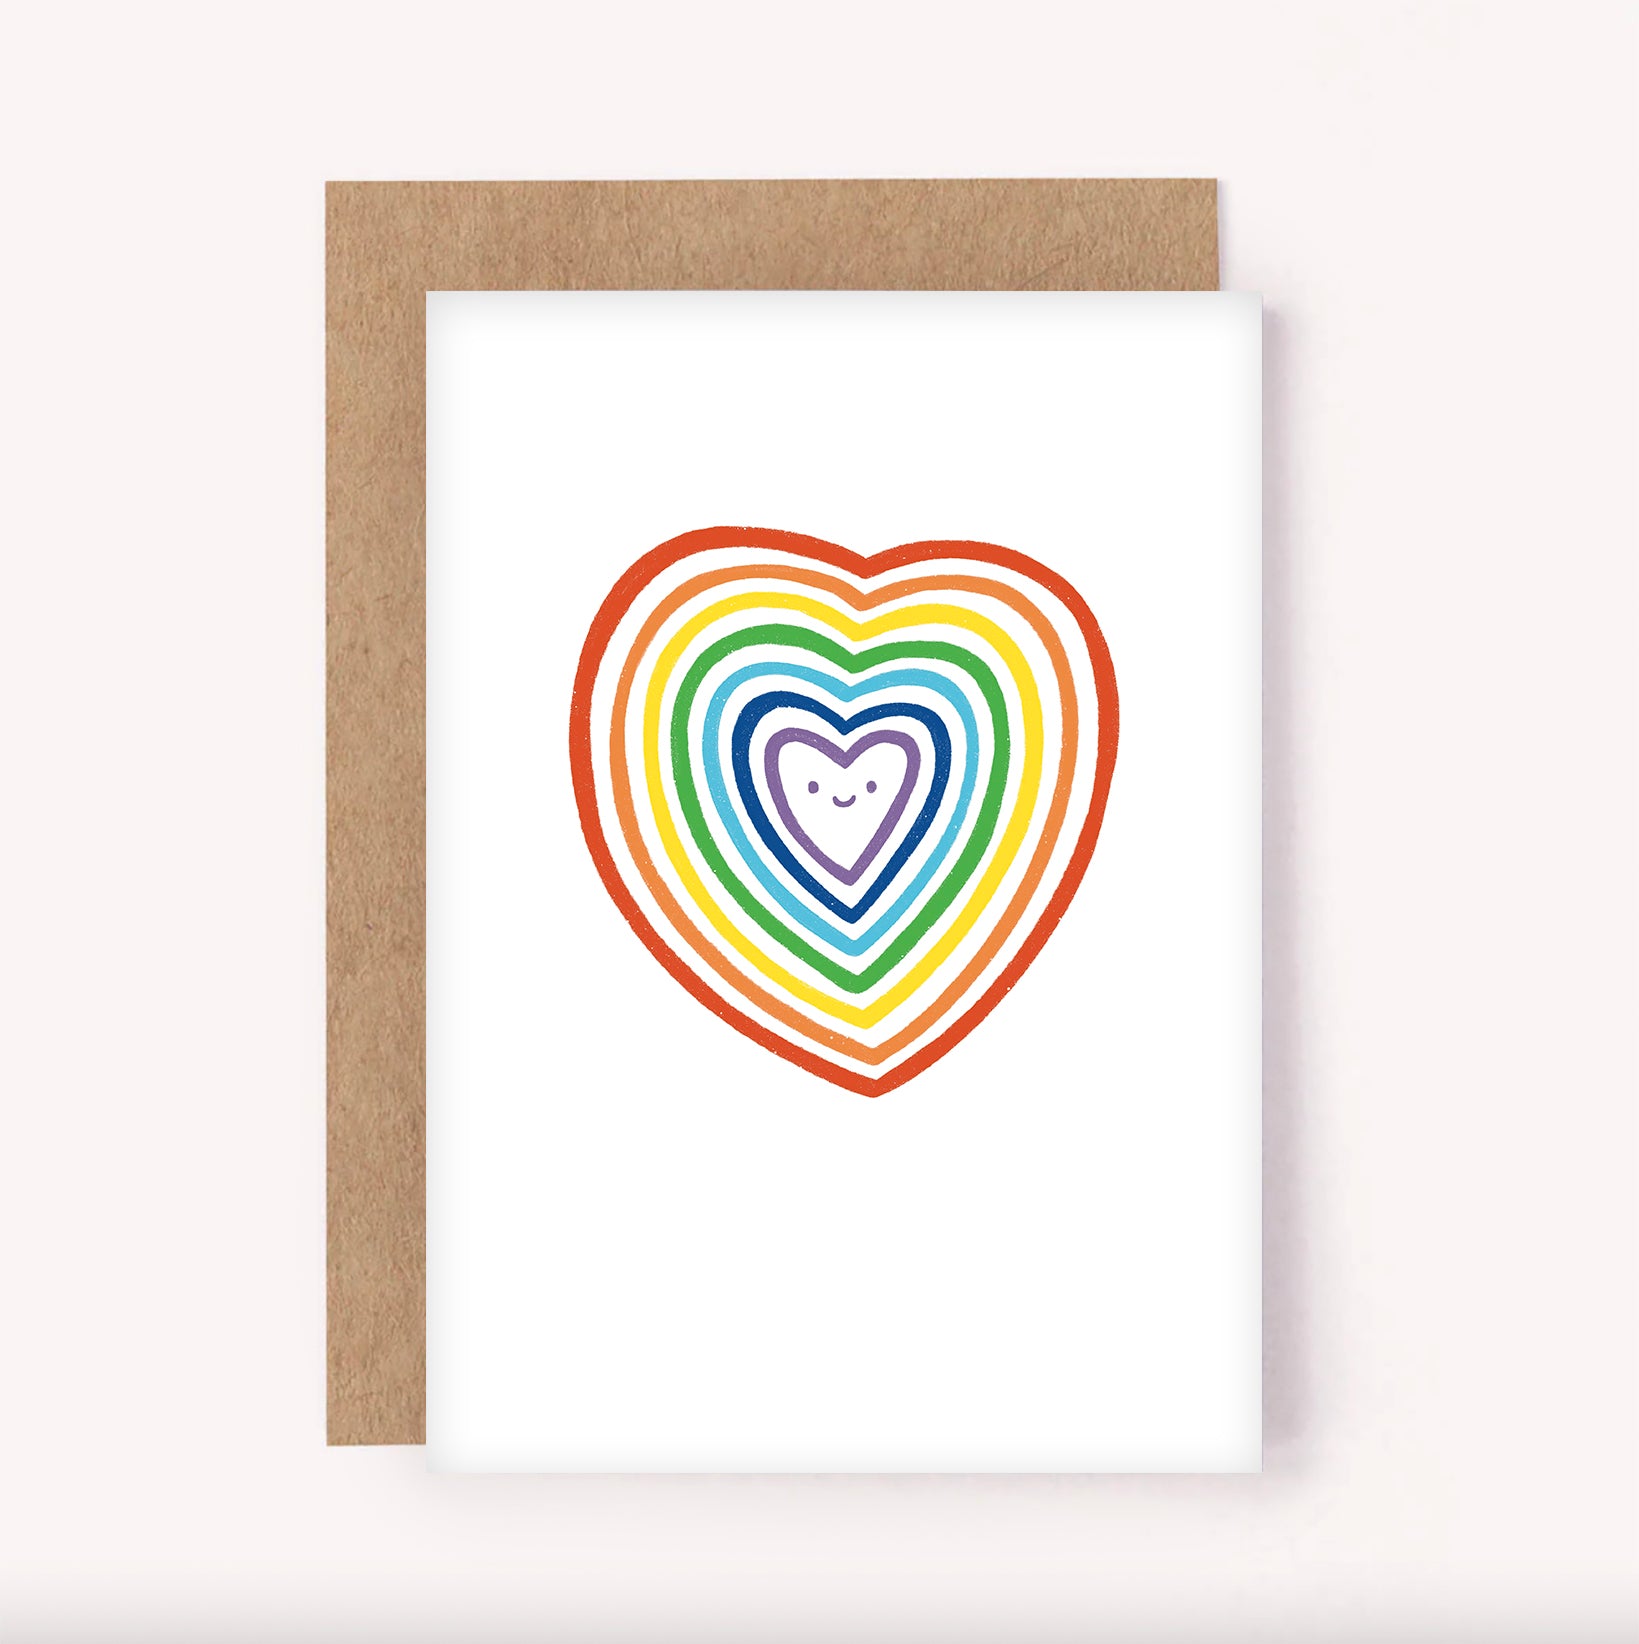 This colourful card is sure to bring joy. Featuring a sweet illustrated rainbow heart with smiling face, on a white background. It's simple design makes it perfect for so many occasions - Valentines Day, an anniversary, engagement, wedding, celebrating Pride or simply sending a rainbow someone's way.